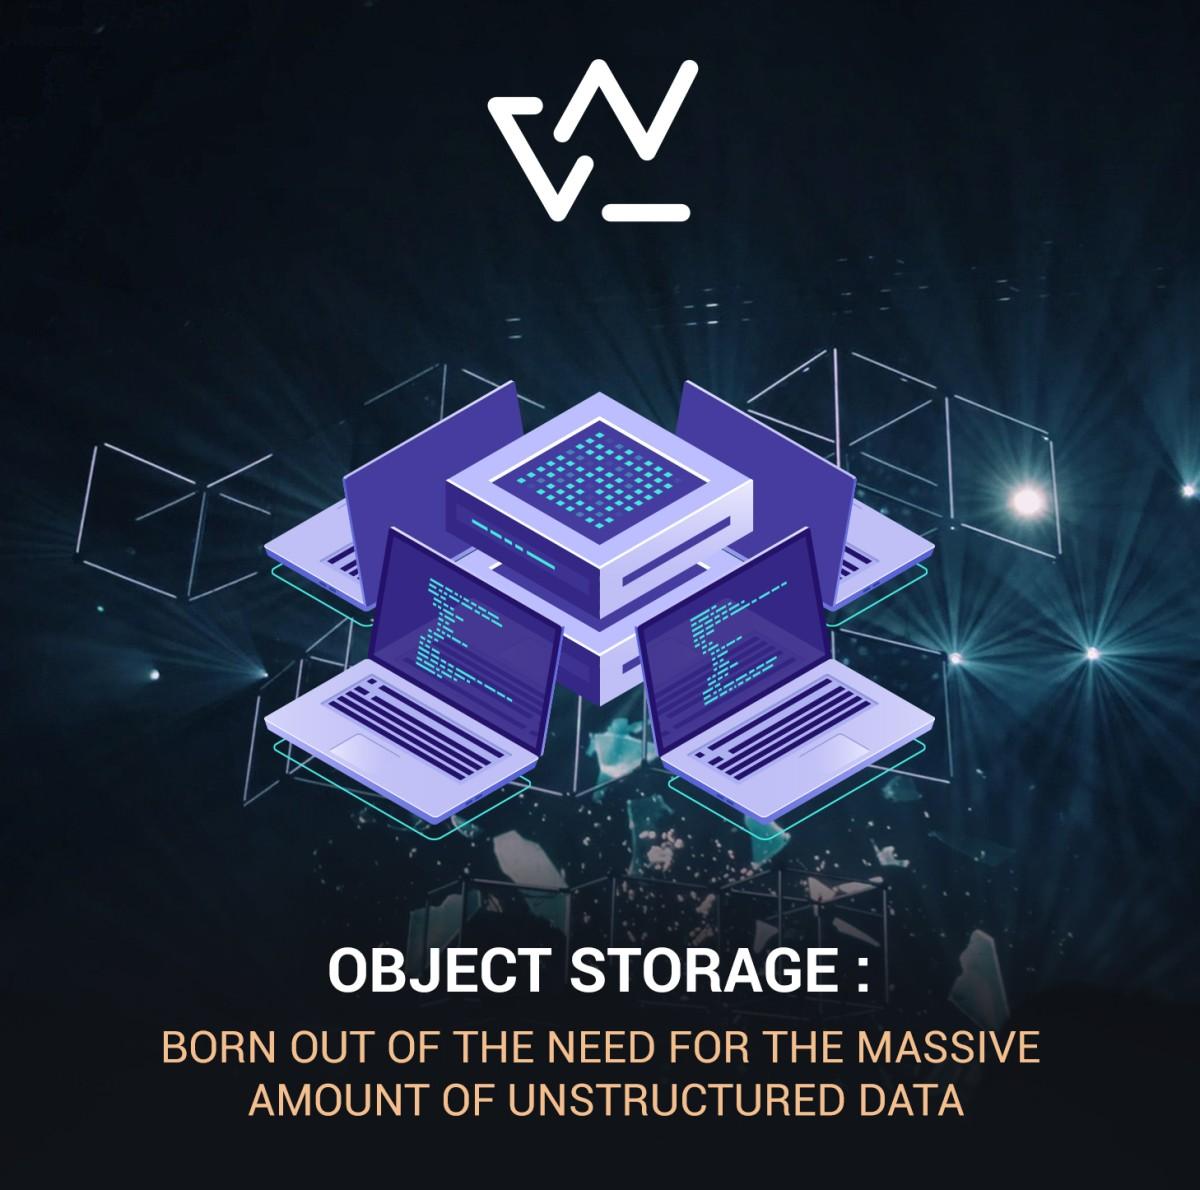 OBJECT STORAGE: BORN OUT OF THE NEED FOR THE MASSIVE AMOUNT OF UNSTRUCTURED DATA